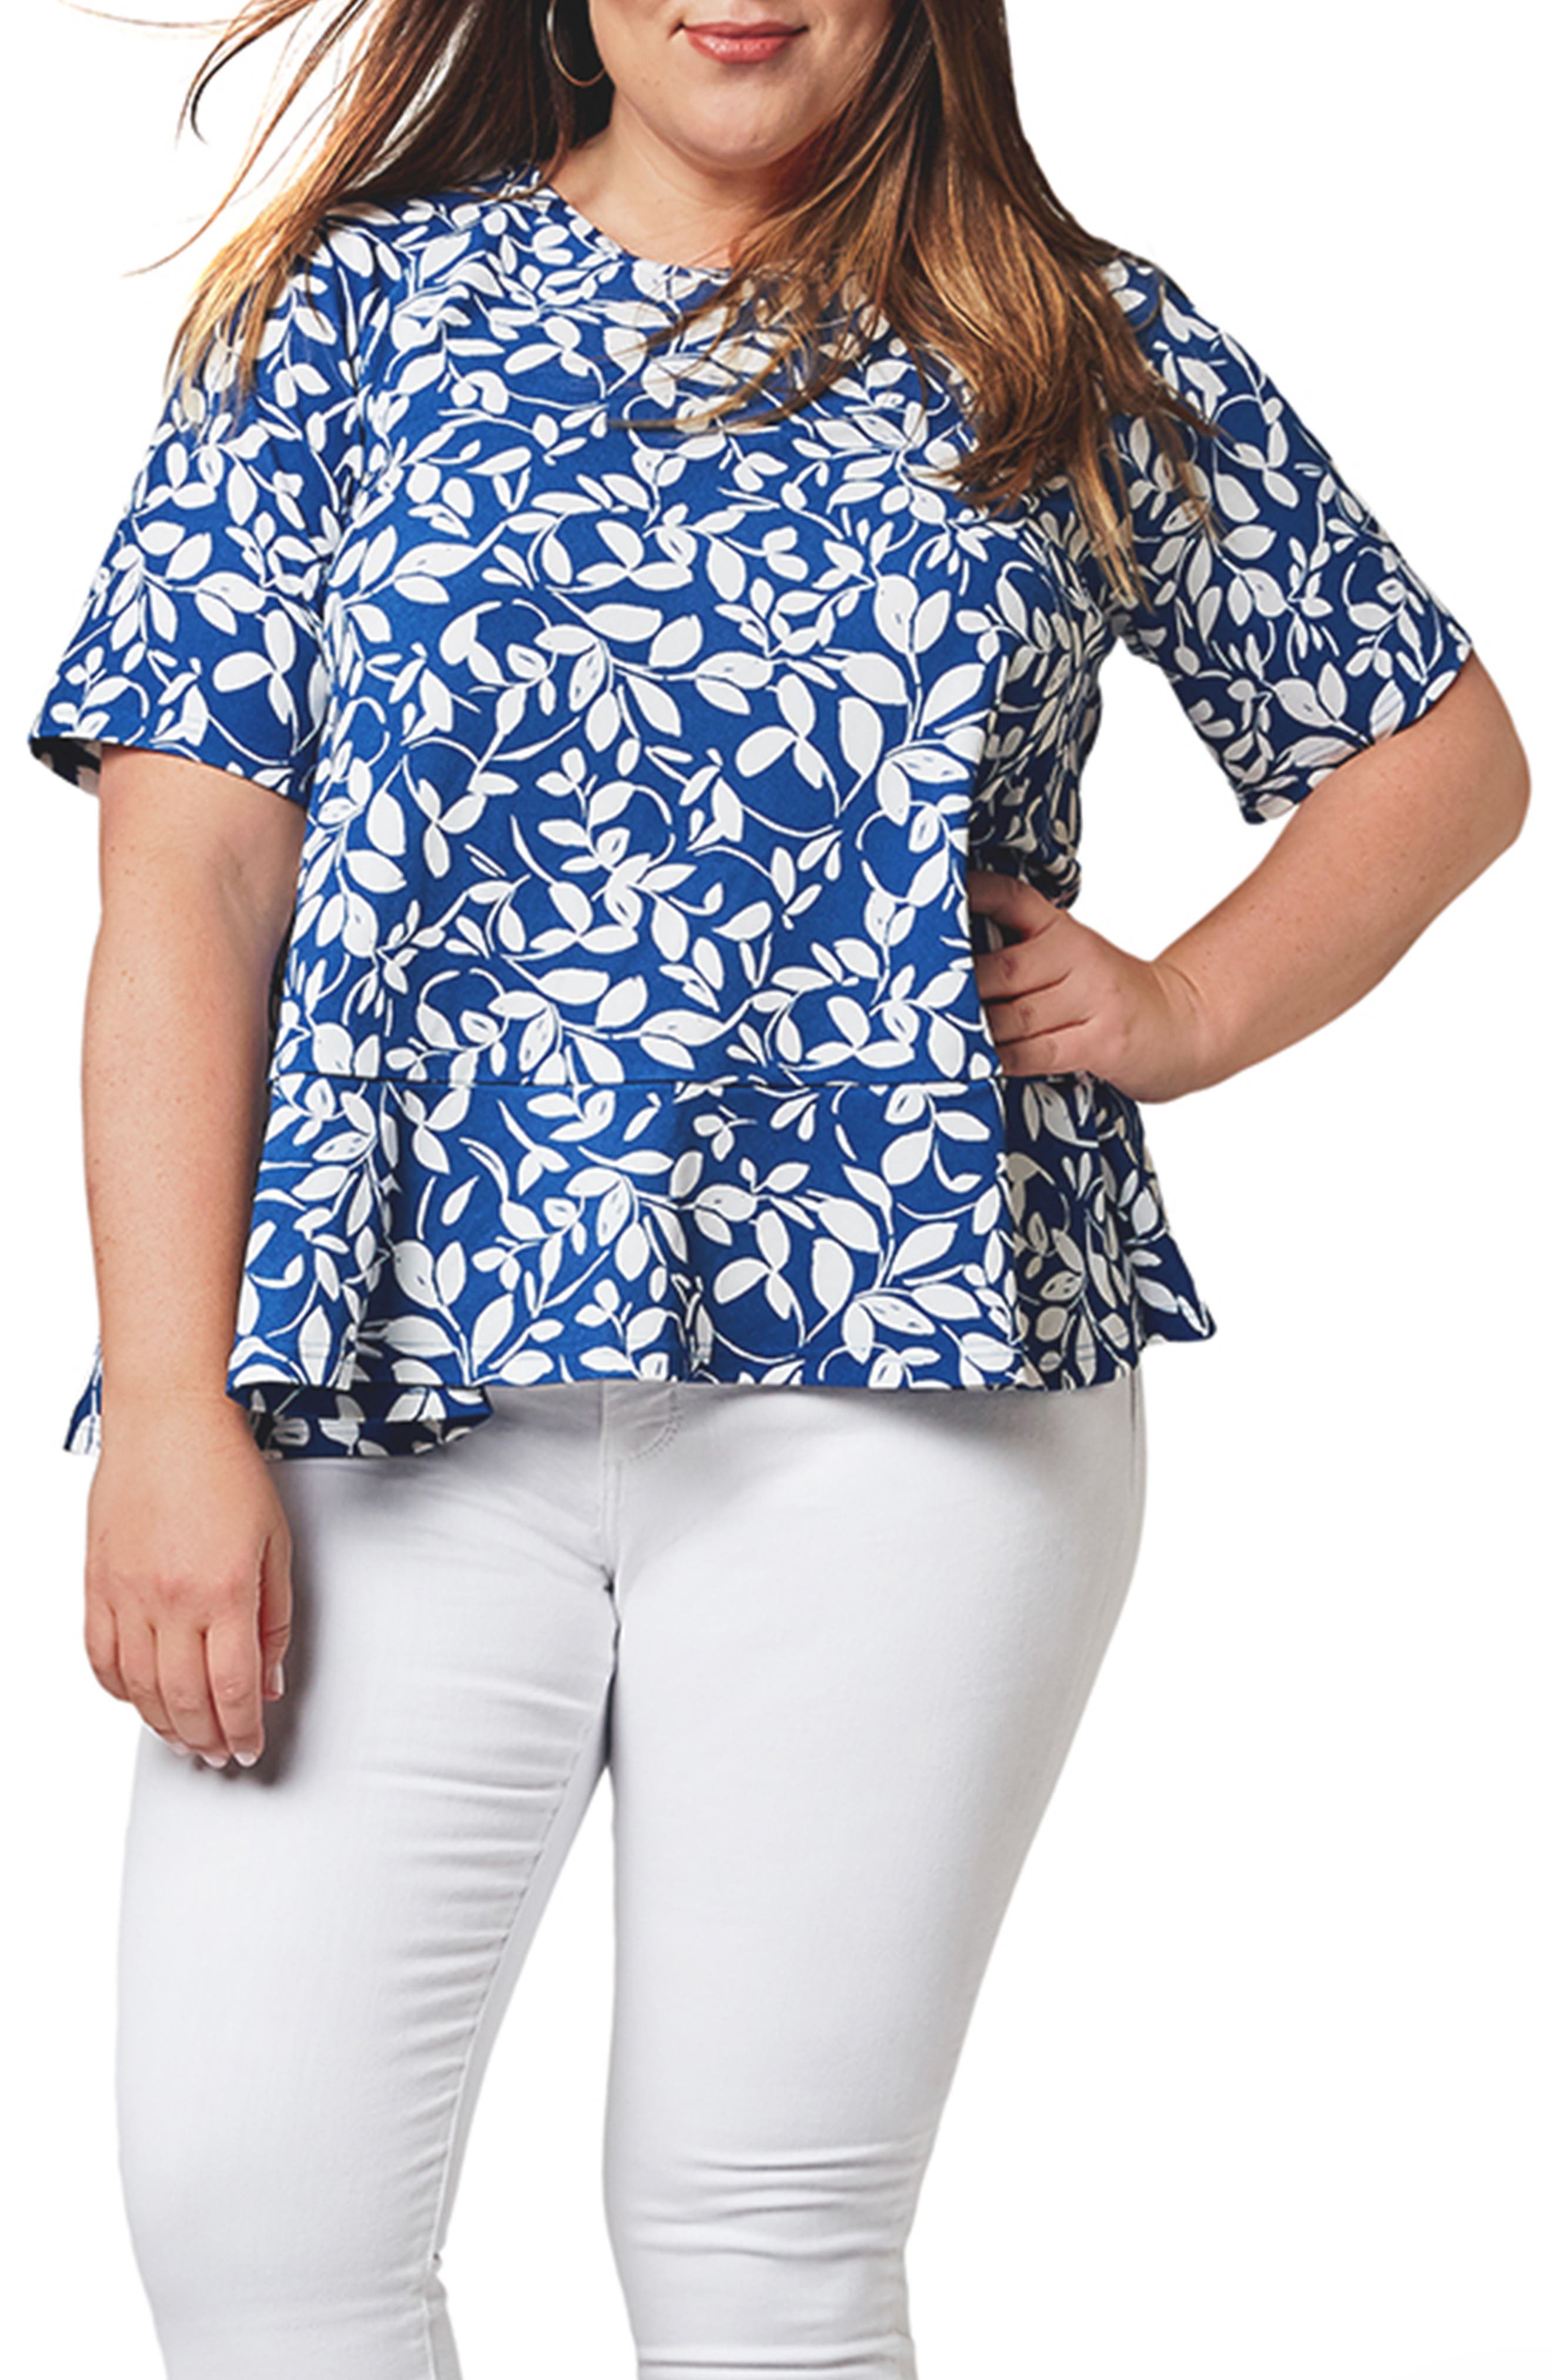 Leota Macie Floral Stretch Crepe Peplum Top in Two Tone Floral Set Sail at Nordstrom